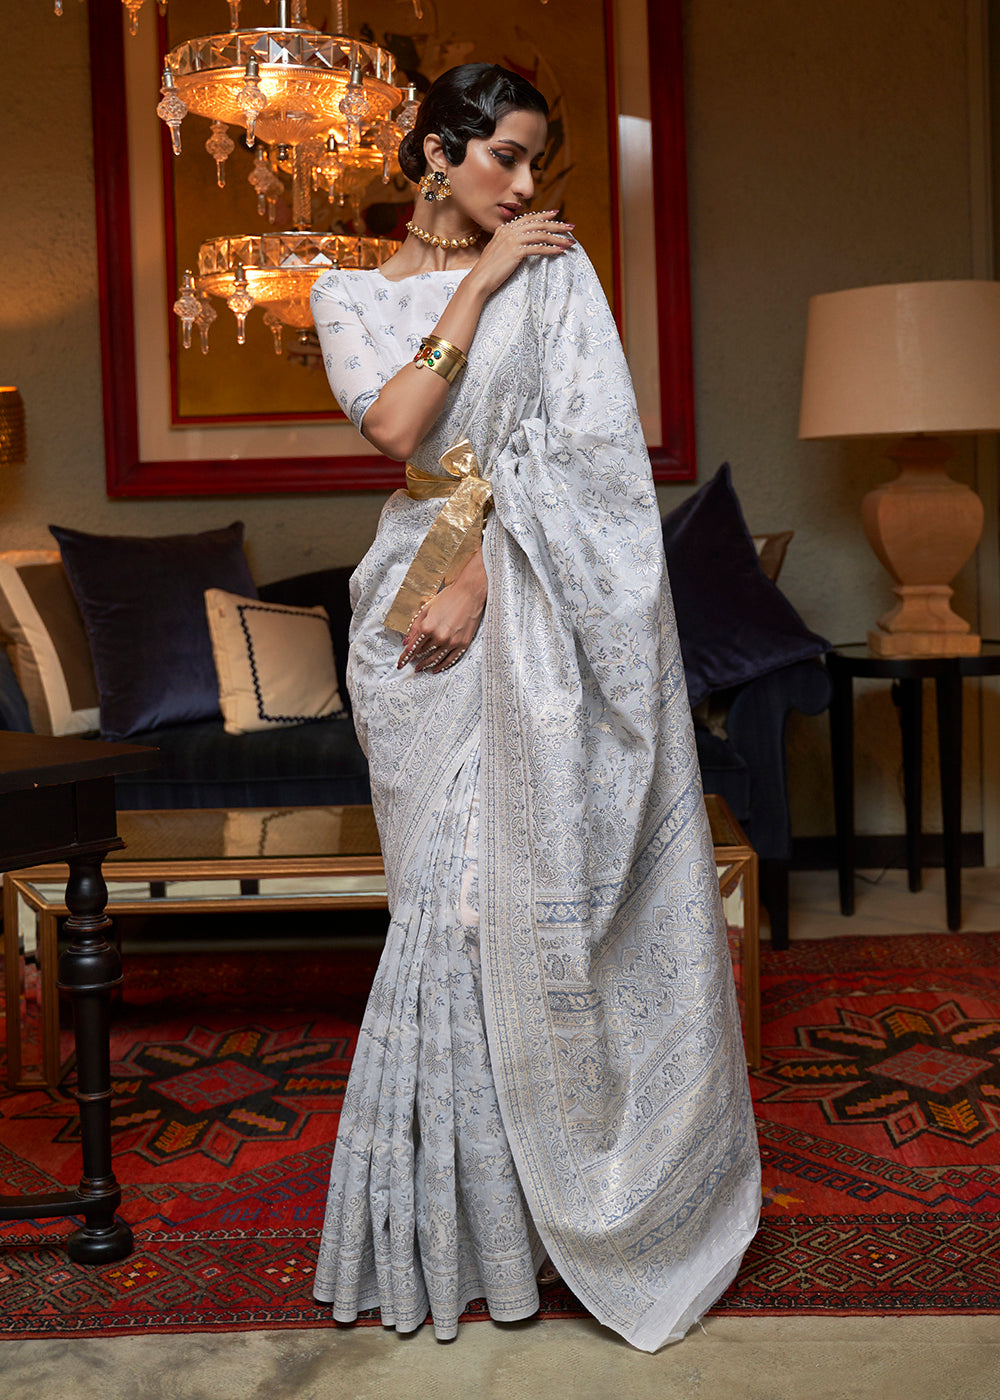 Buy Now Silver Pearl White Kashmiri Cotton Silk Saree Online in USA, UK, Canada & Worldwide at Empress Clothing.